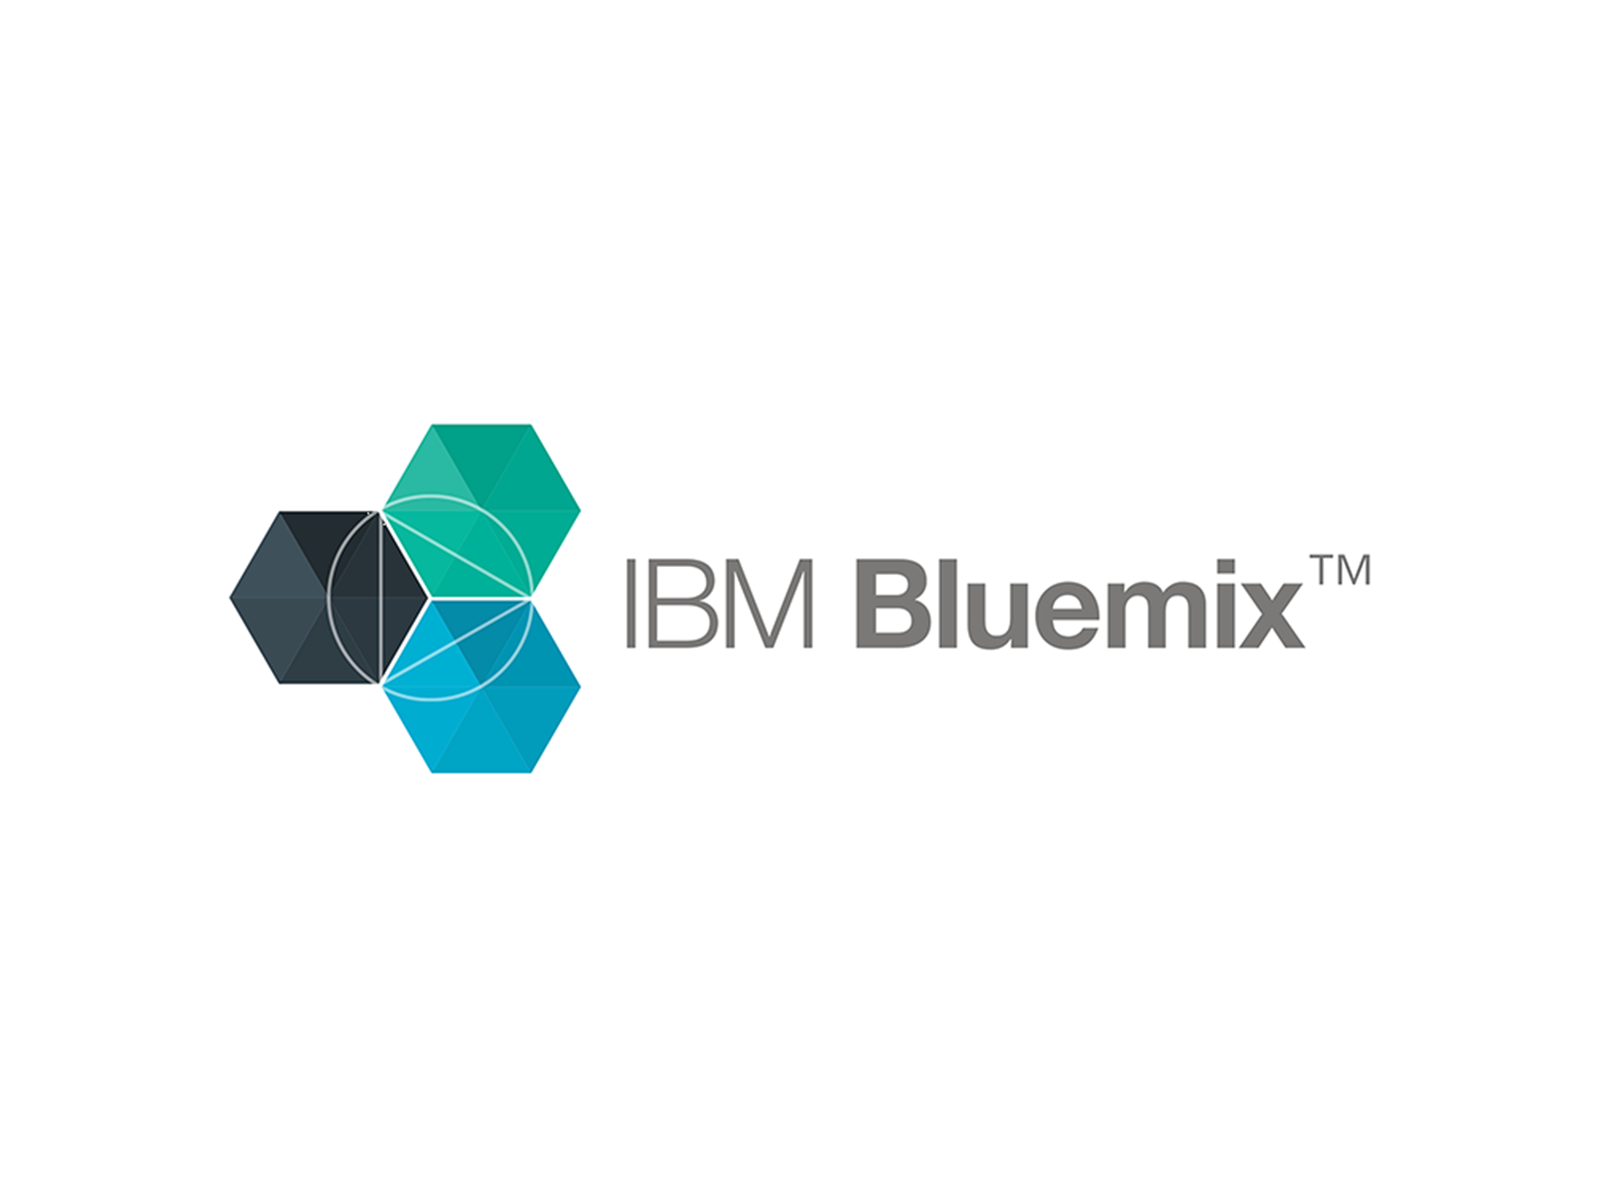 Infrastructure as a Service by IBM Bluemix